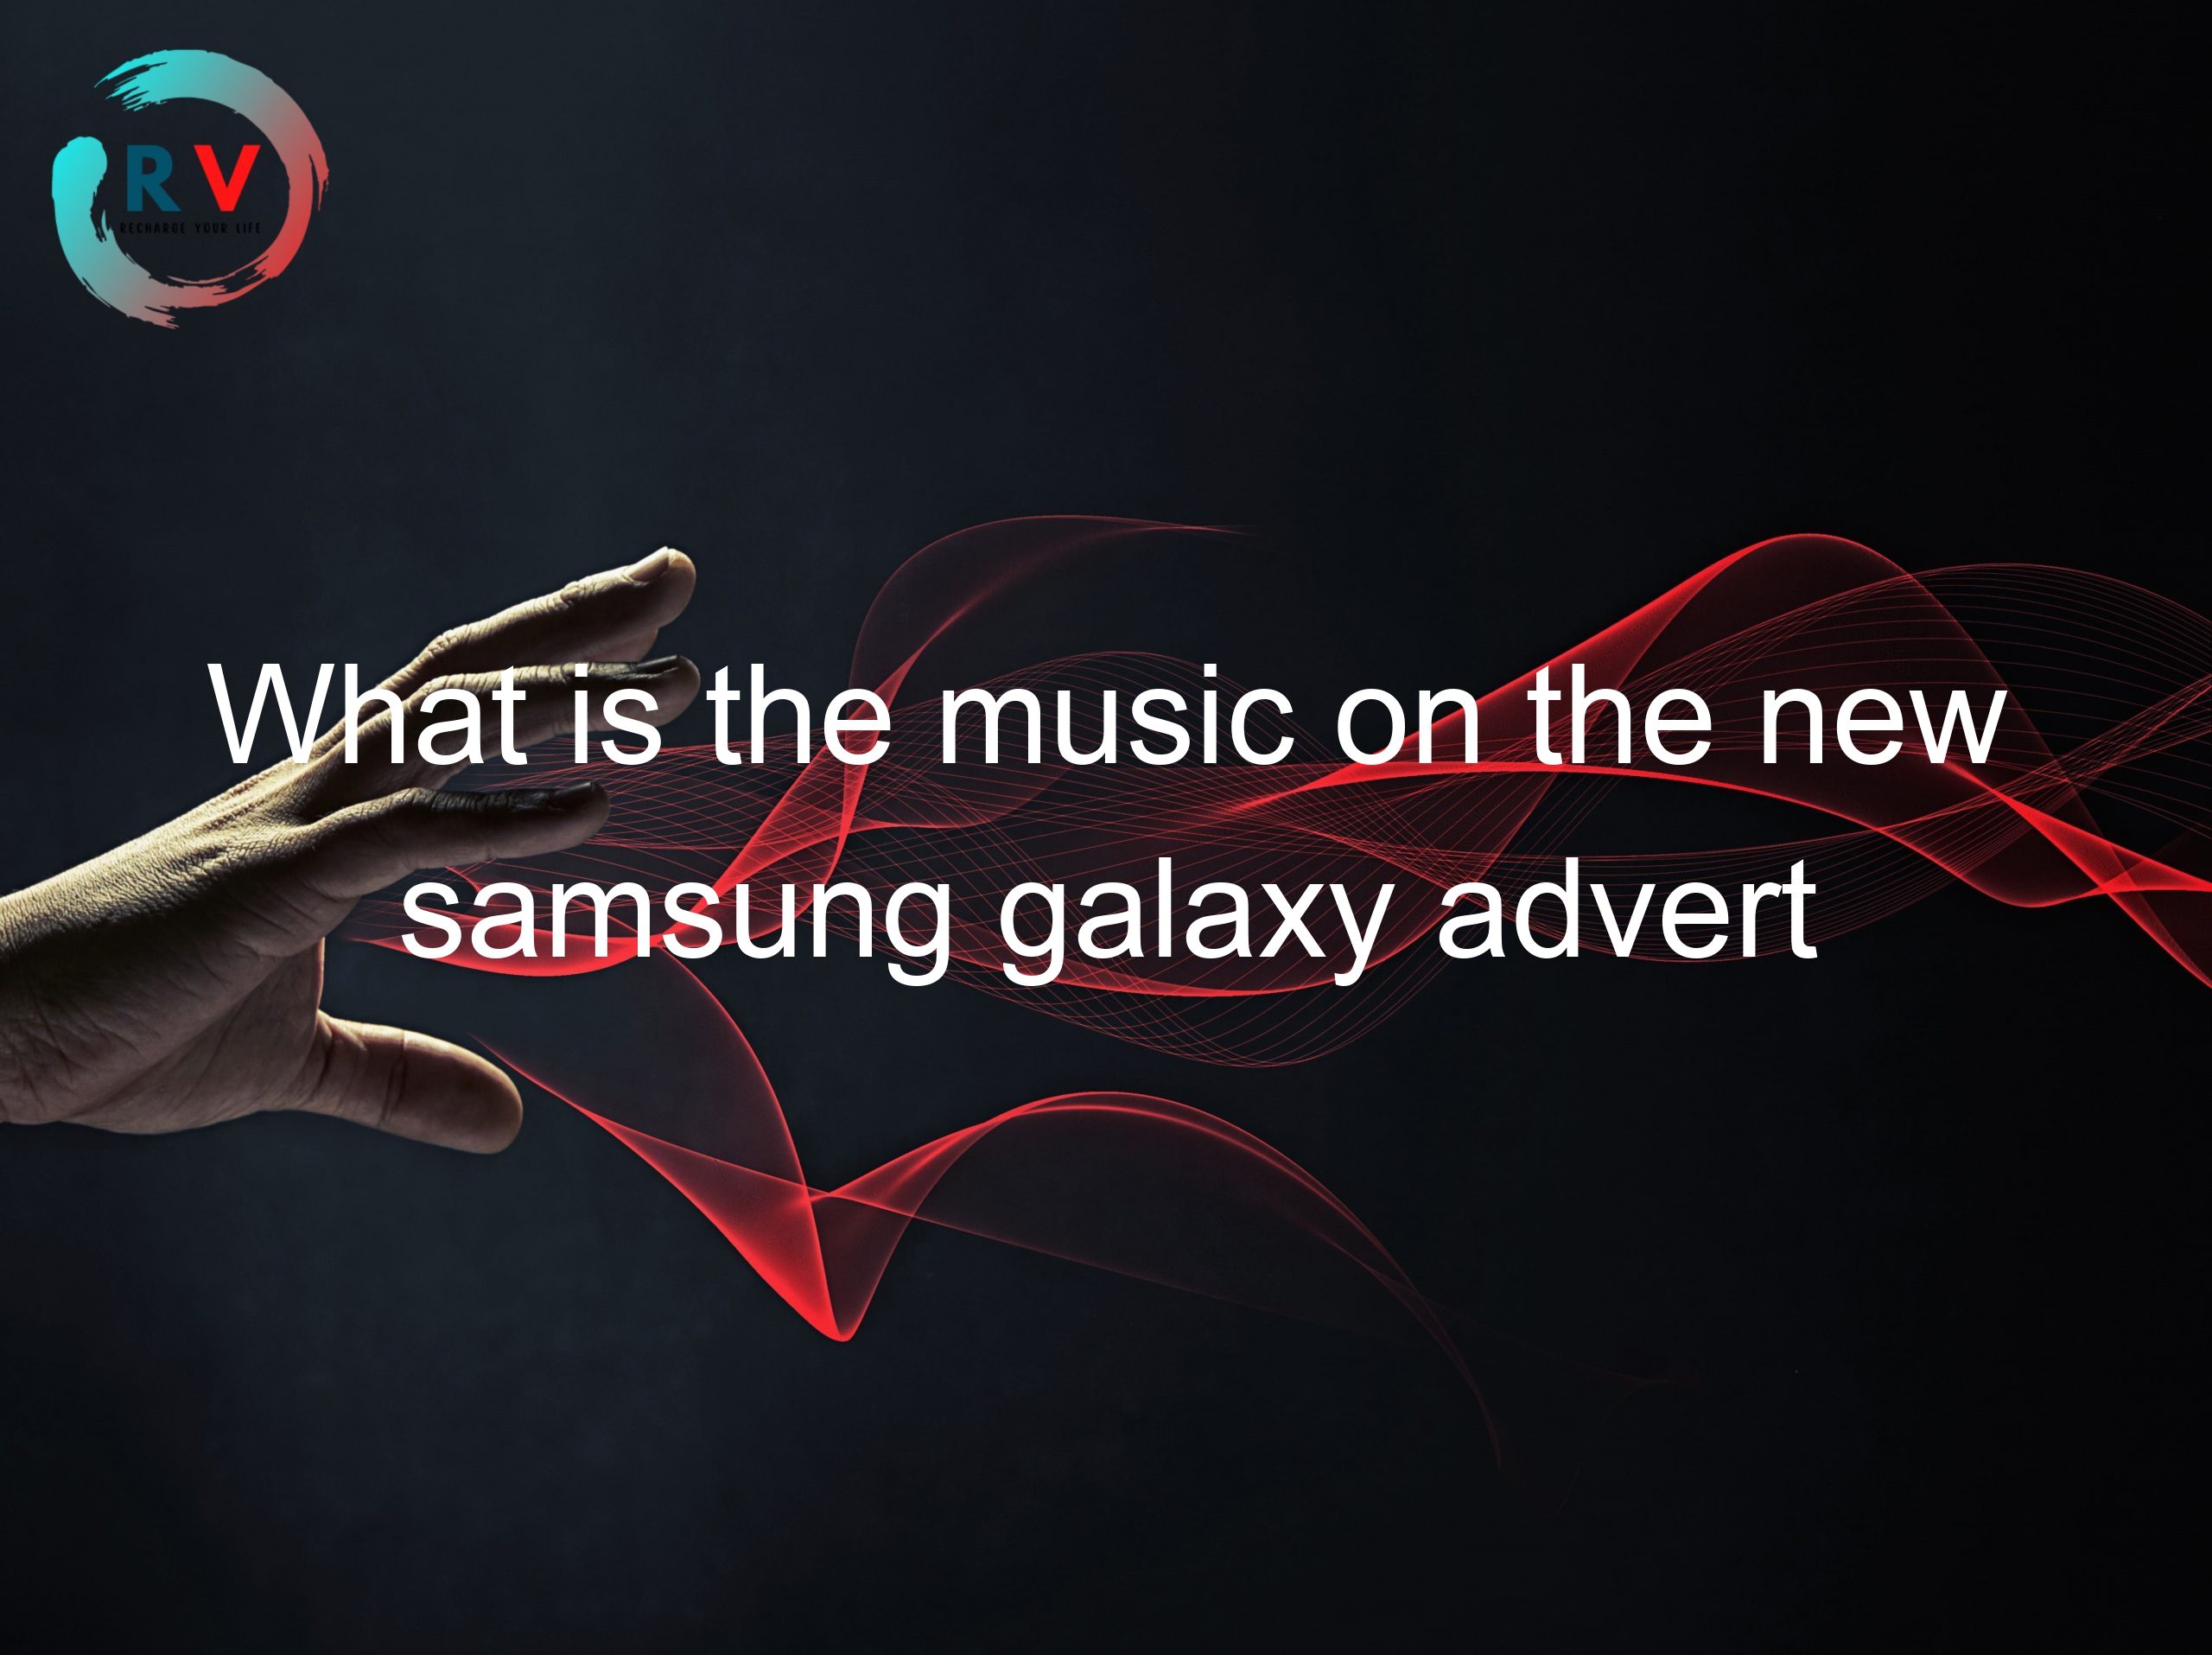 What is the music on the new samsung galaxy advert